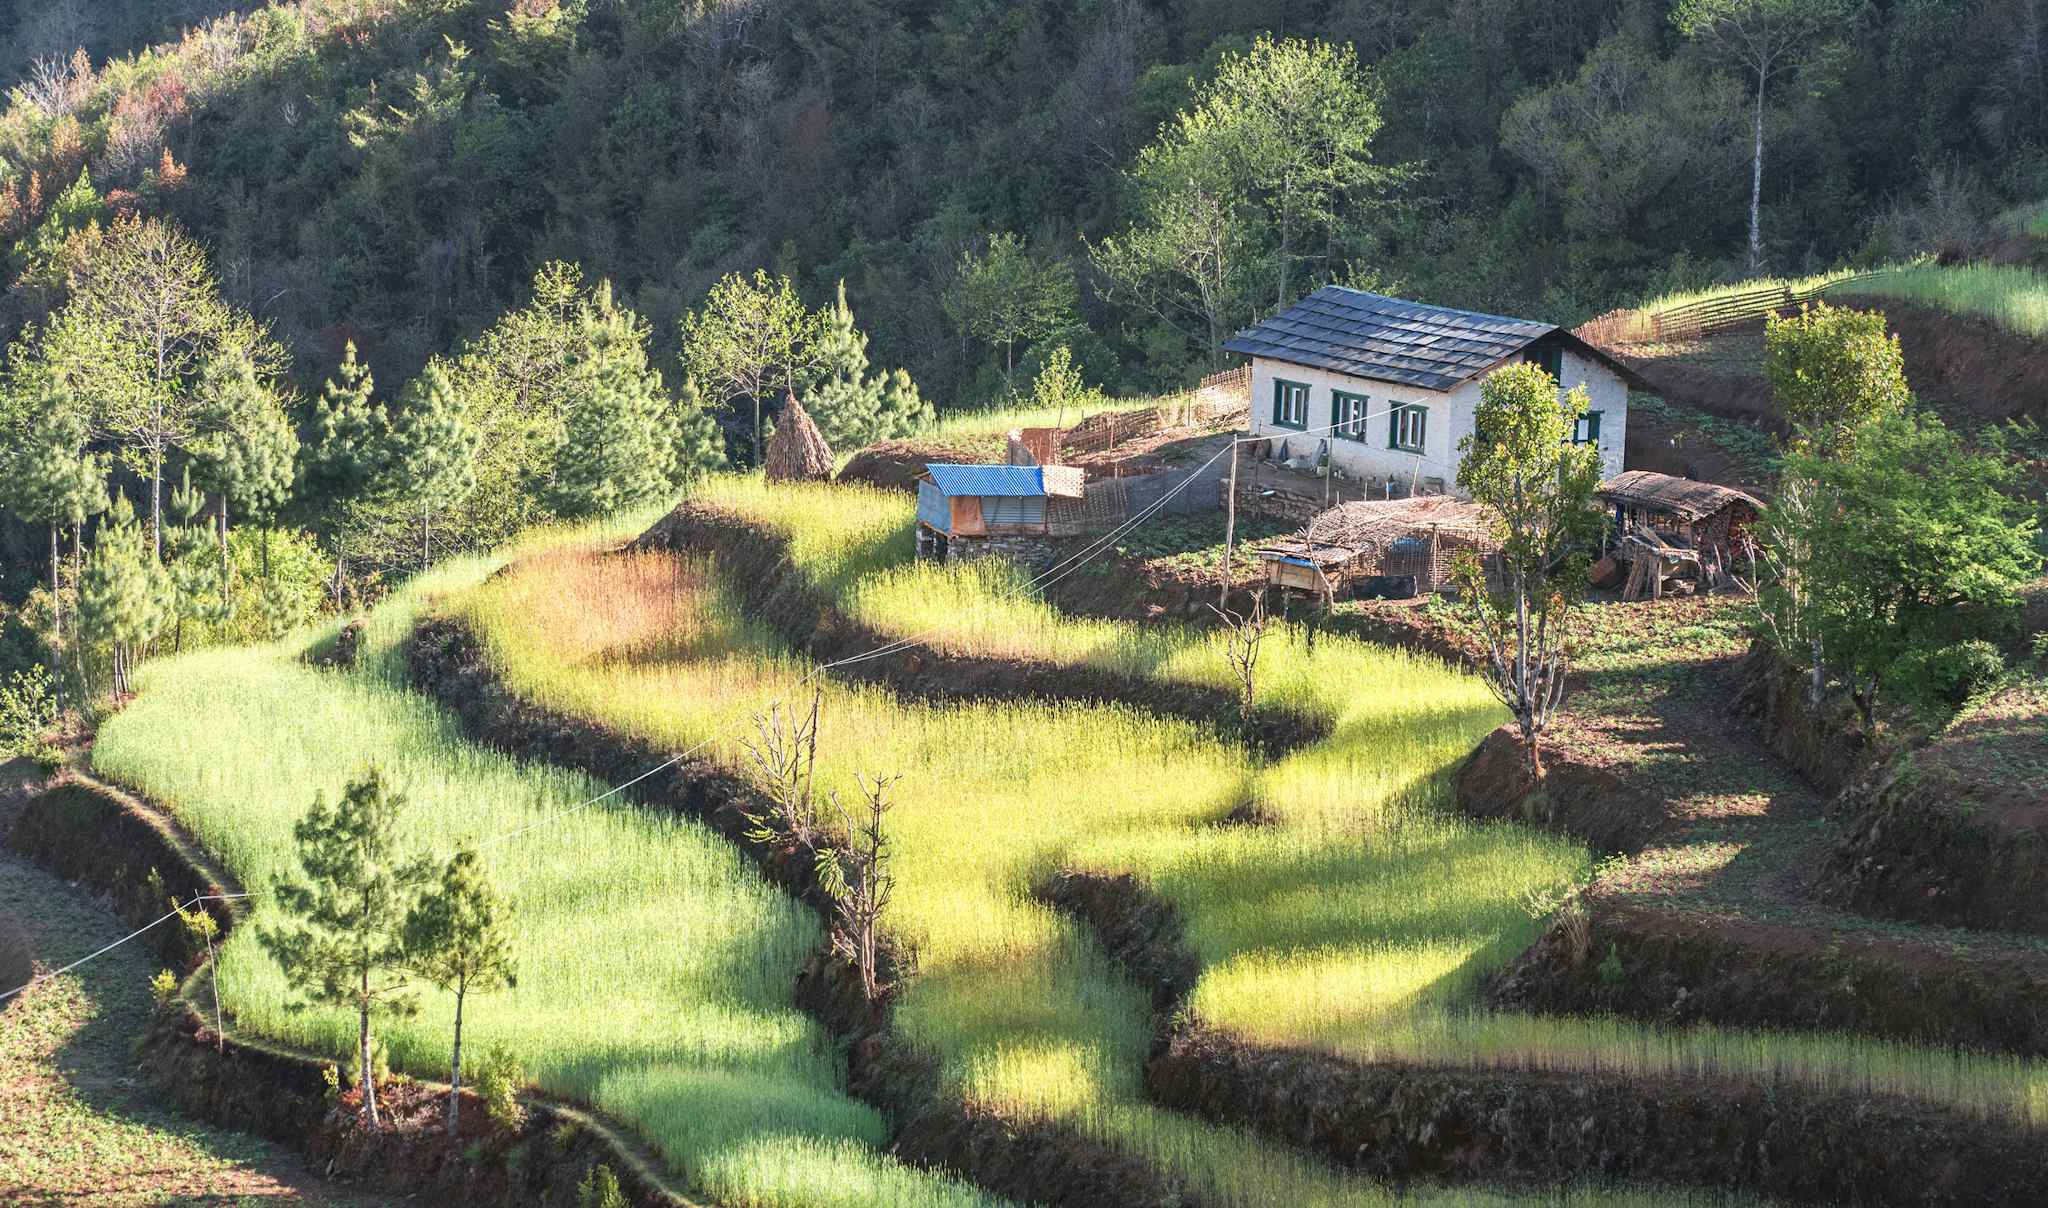 Agricultural terraces in the Himalayas, Nepal. Photo: GettyImages-1198176567